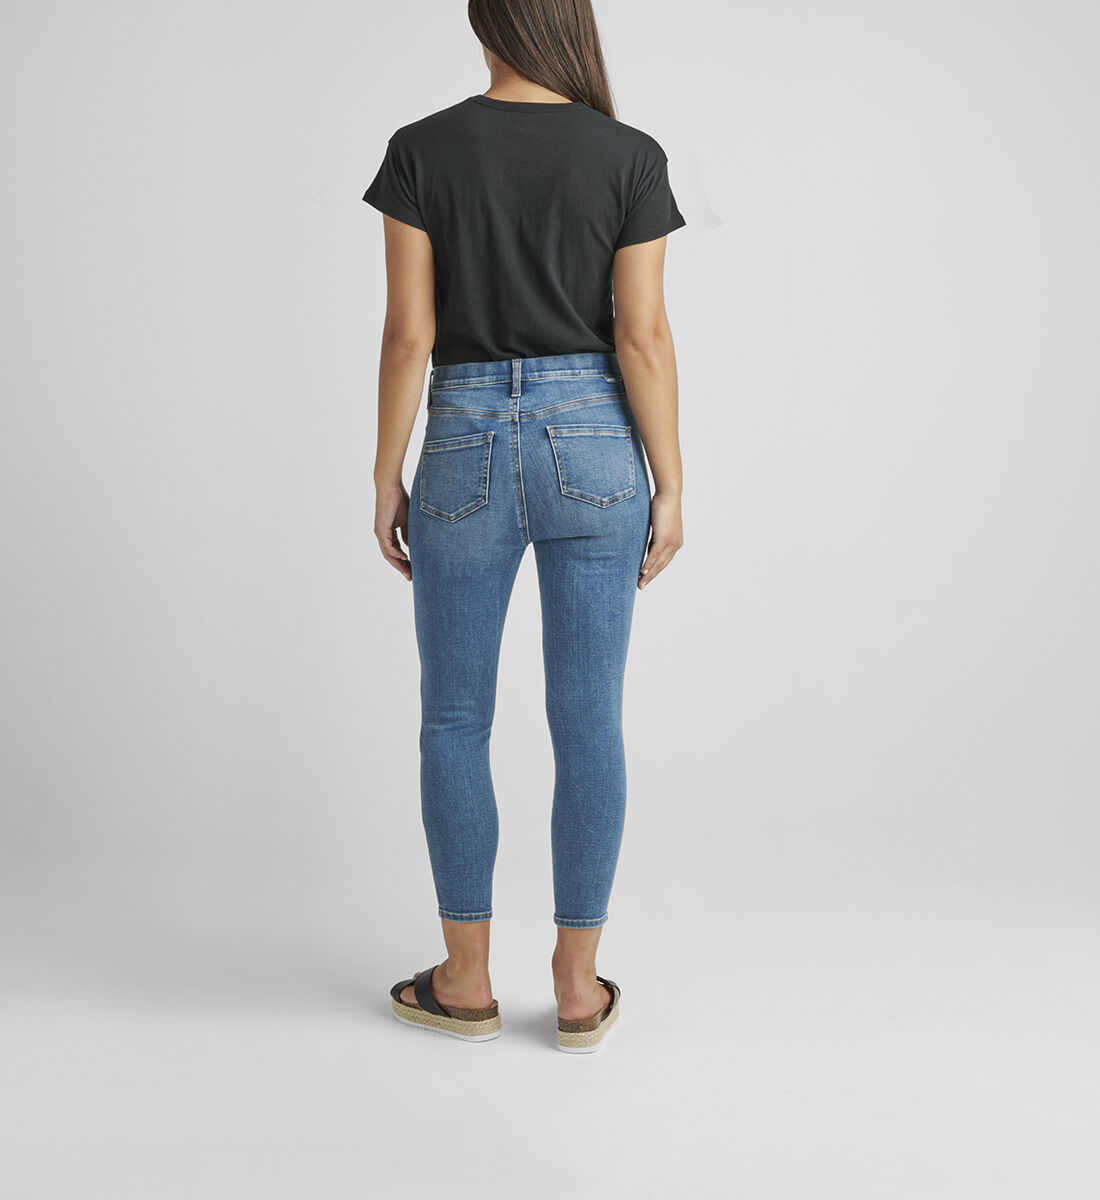 Valentina High Rise Skinny Crop Pull-On Jeans Petite Back